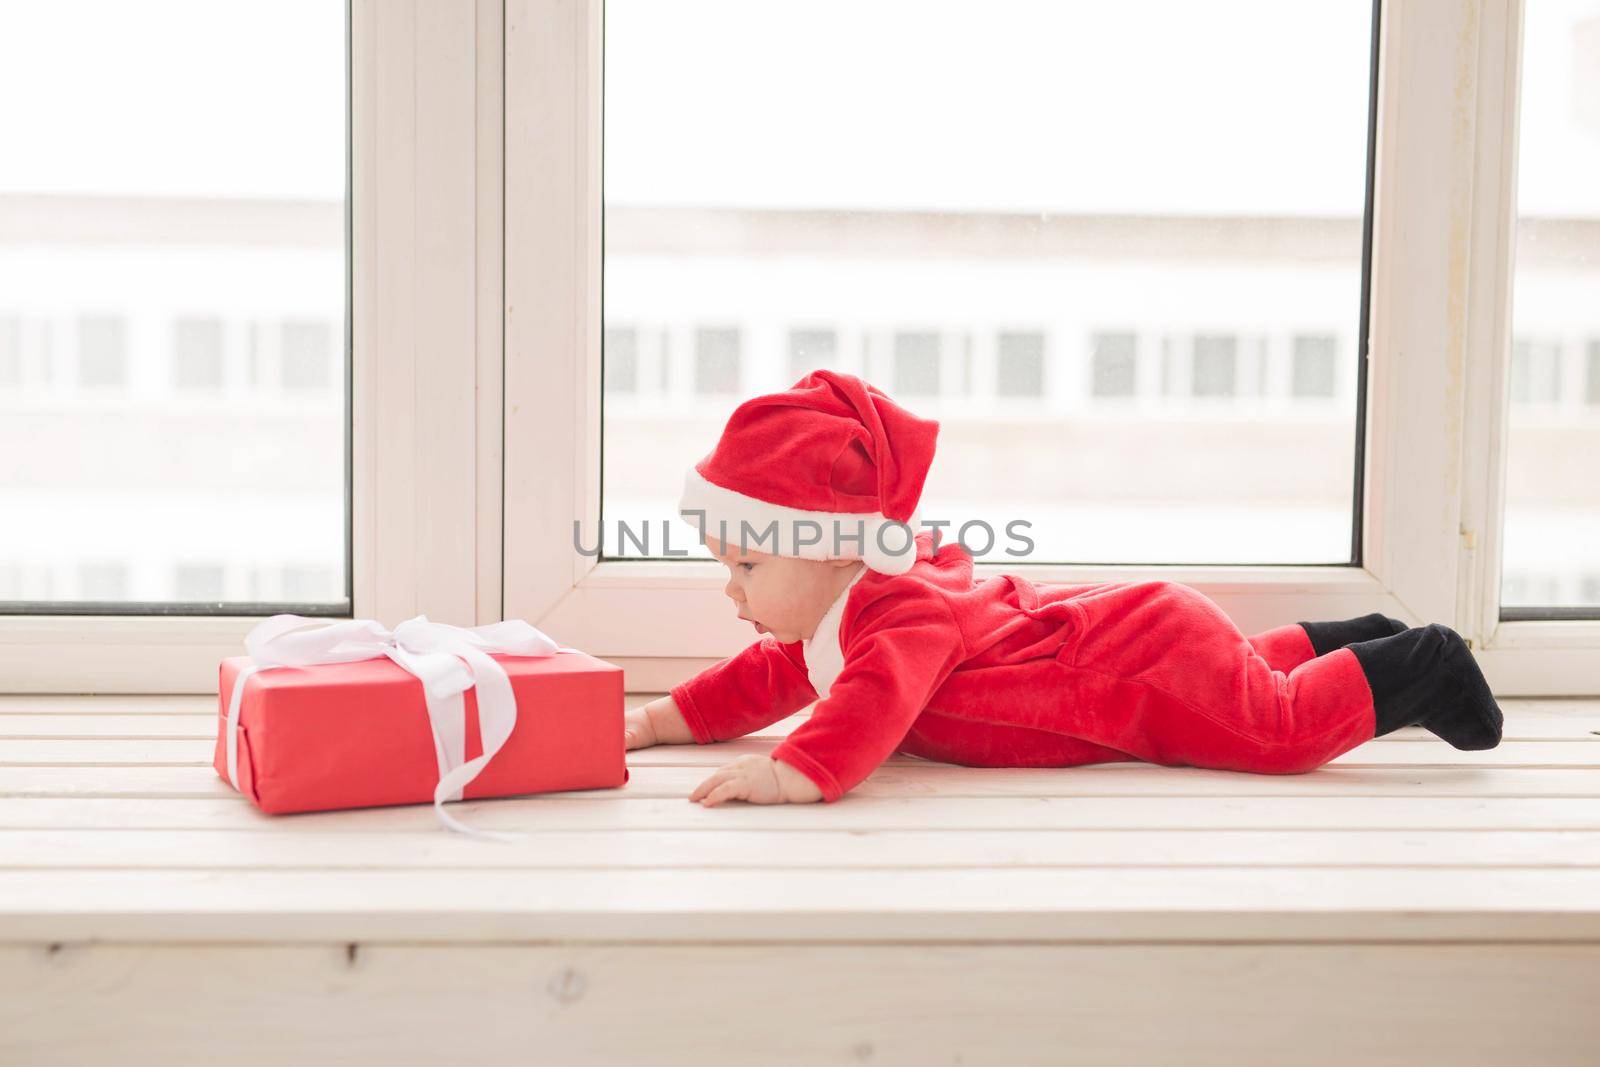 Beautiful little baby celebrates Christmas. New Year's holidays. Baby in a Christmas costume and in santa hat.